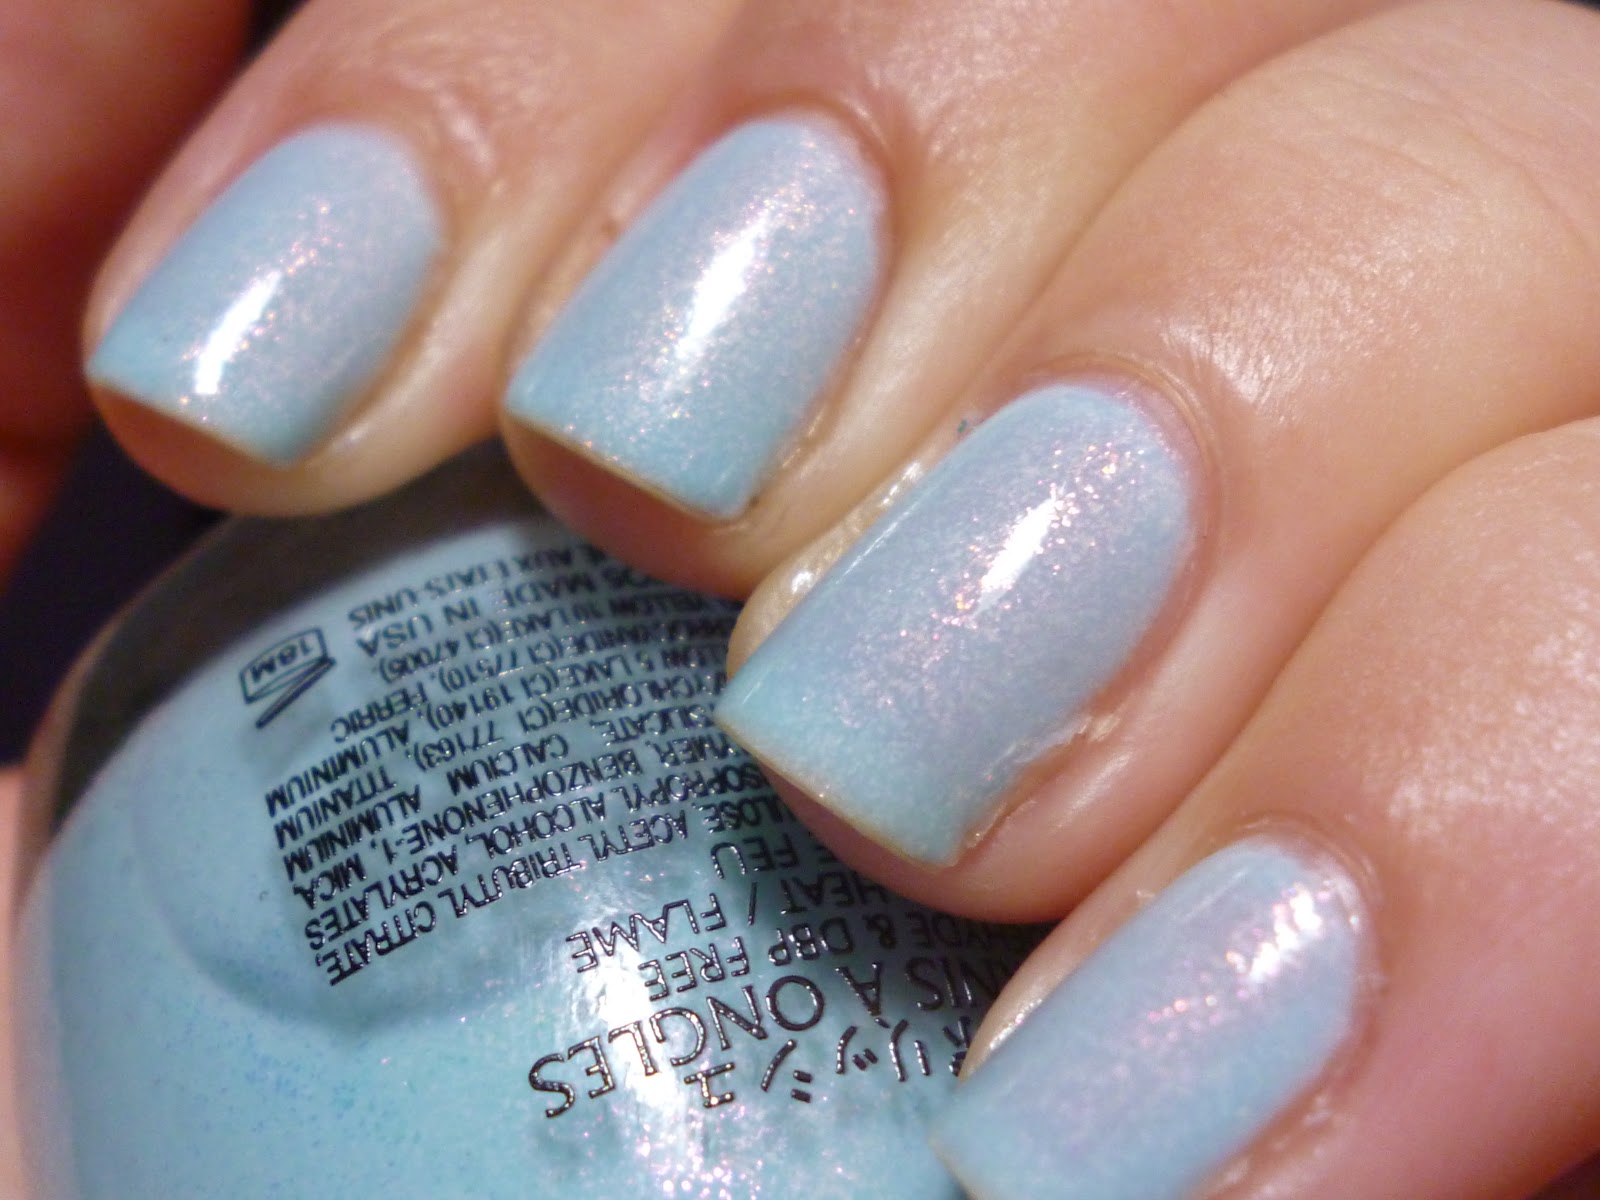 9. Sinful Colors Professional Nail Polish in "Cinderella" - wide 4